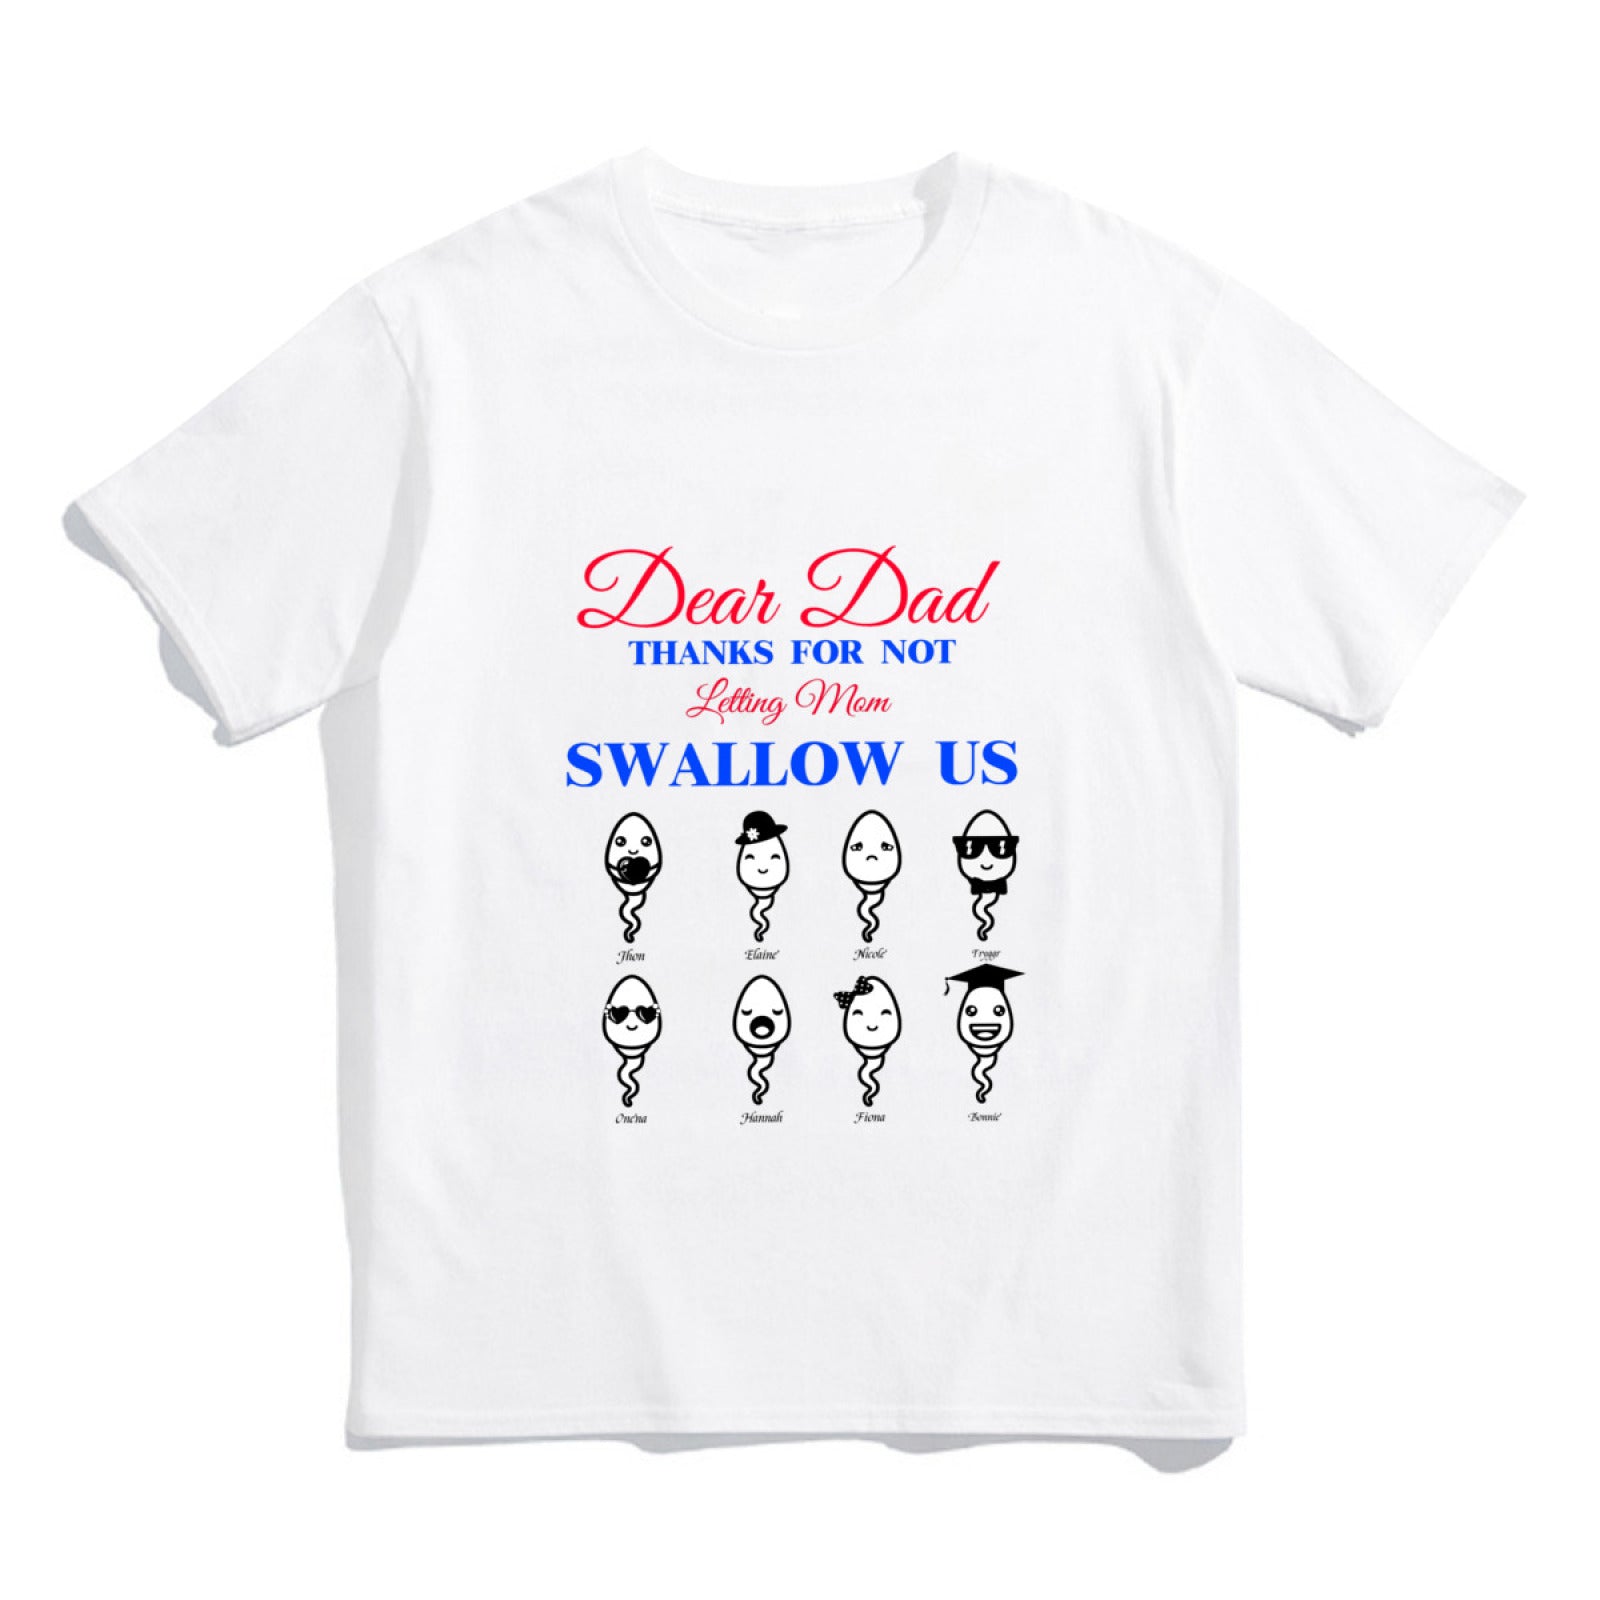 Personalized Dad Shirt for Men, Thanks for Not Swallowing Us T-Shirt , Fathers Day Shirt, Custom Funny Shirt, Daddy Gifts - colorfulcustom